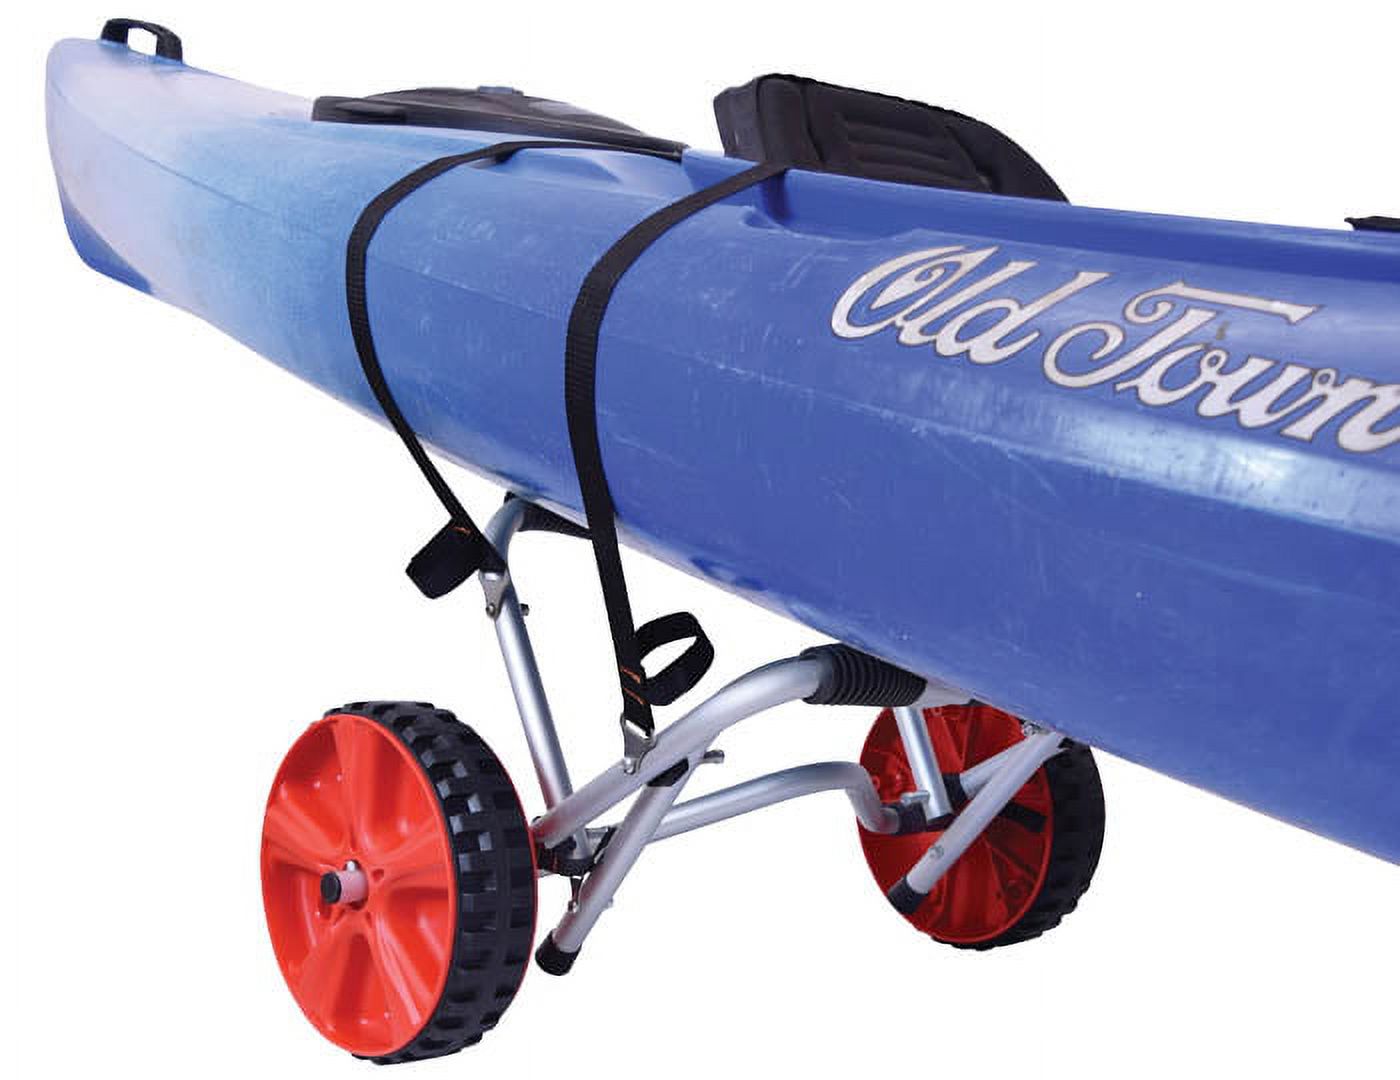 Malone ClipperTRX Deluxe Kayak/Canoe Cart with No-Flat Tires - image 5 of 5